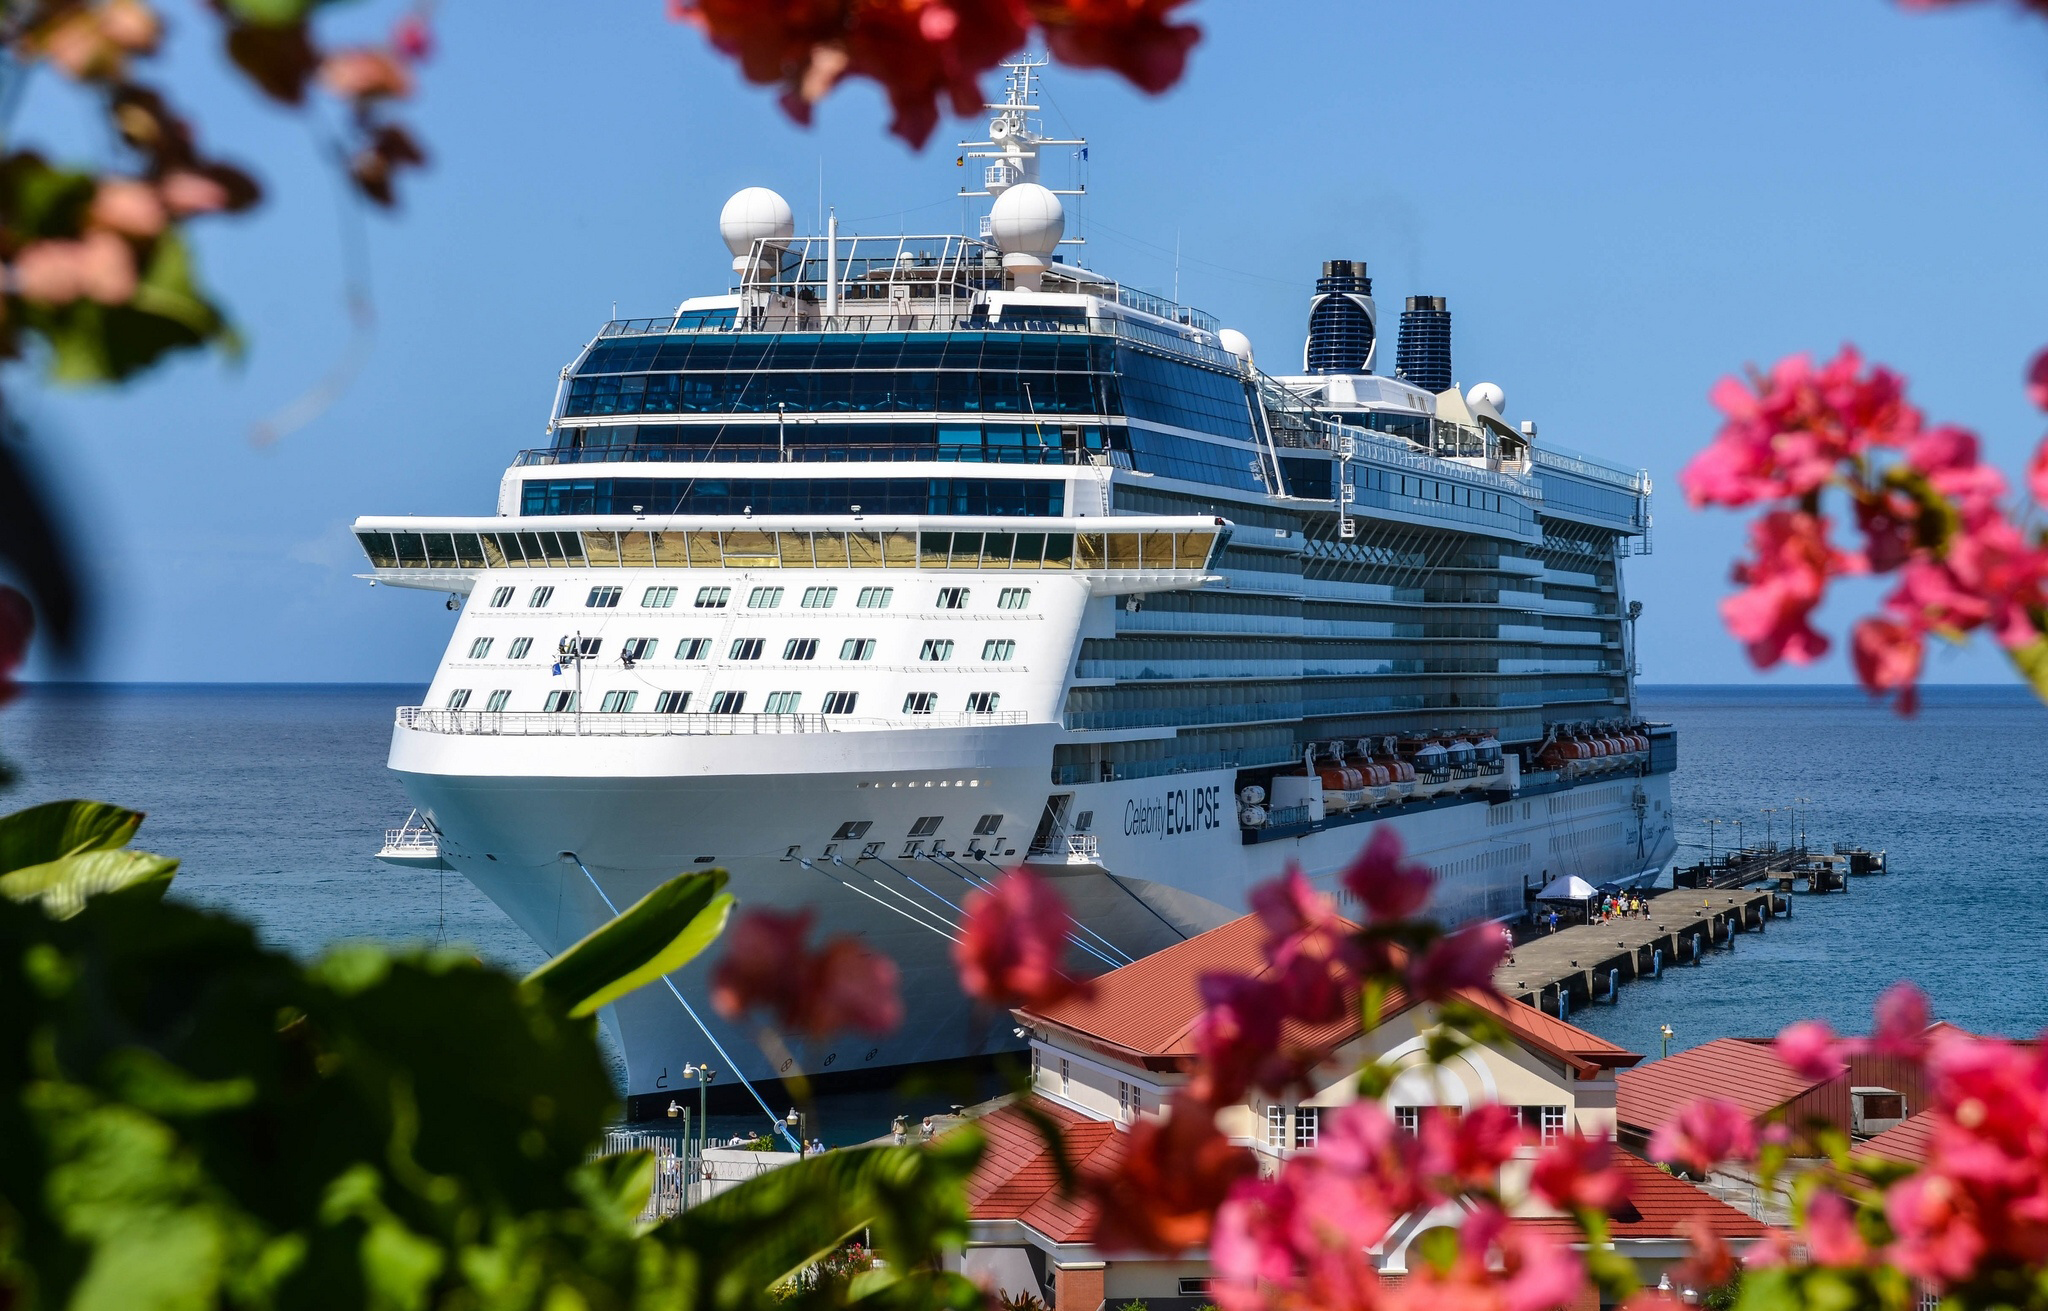 Vehicles Celebrity Eclipse HD Wallpaper | Background Image